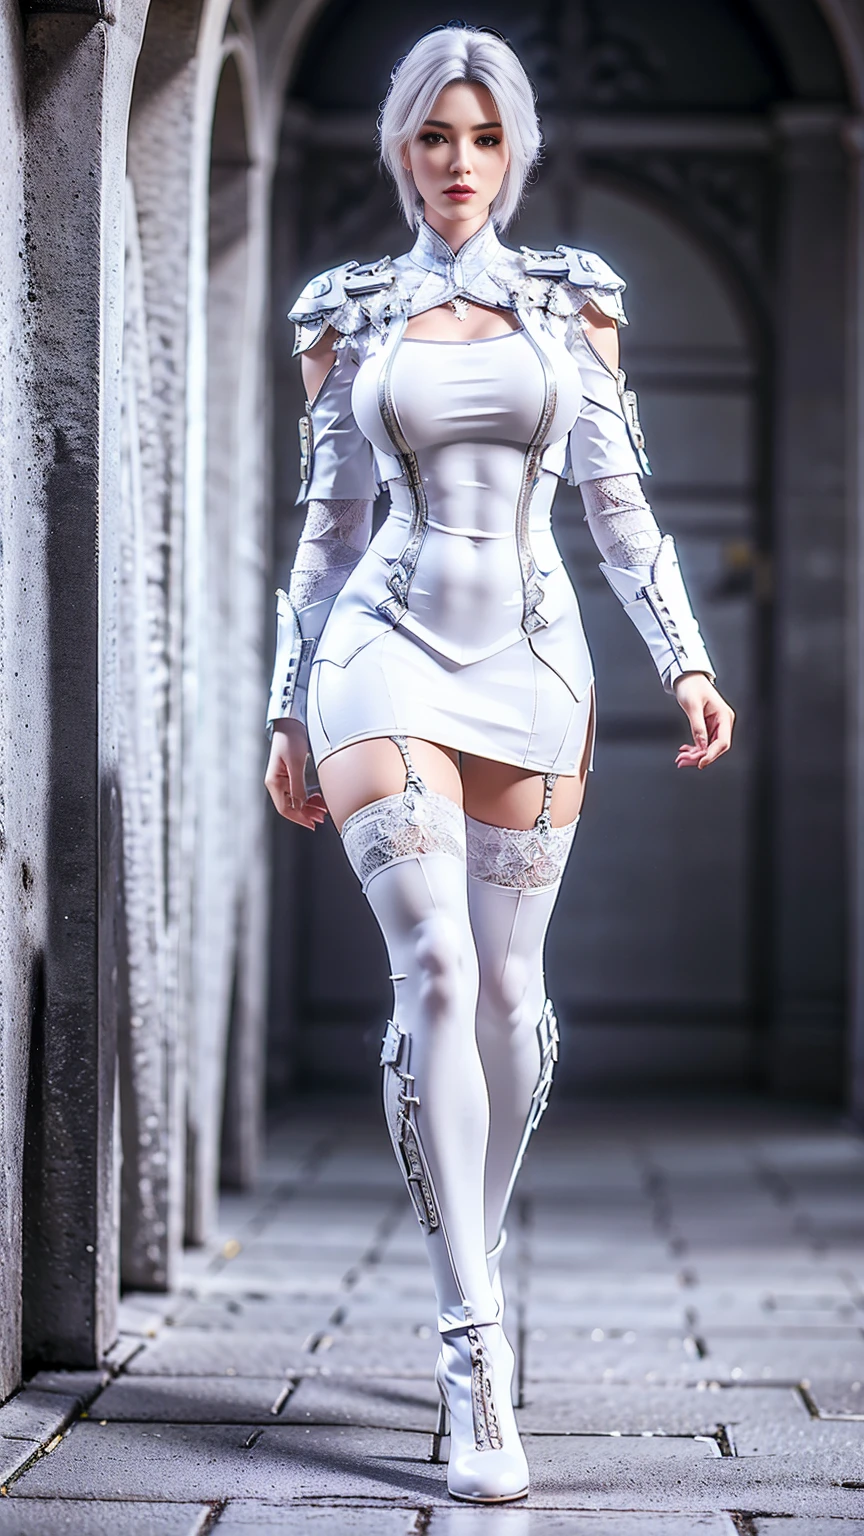 8k, HDR, ultimate-realistic texture, sharp texture, highres, best quality. Futuristic character, Full body, tall and fit body, short hair, white hair, wearing uniform with white lace, wearing white lace stockings and high heels, standing in the castle.